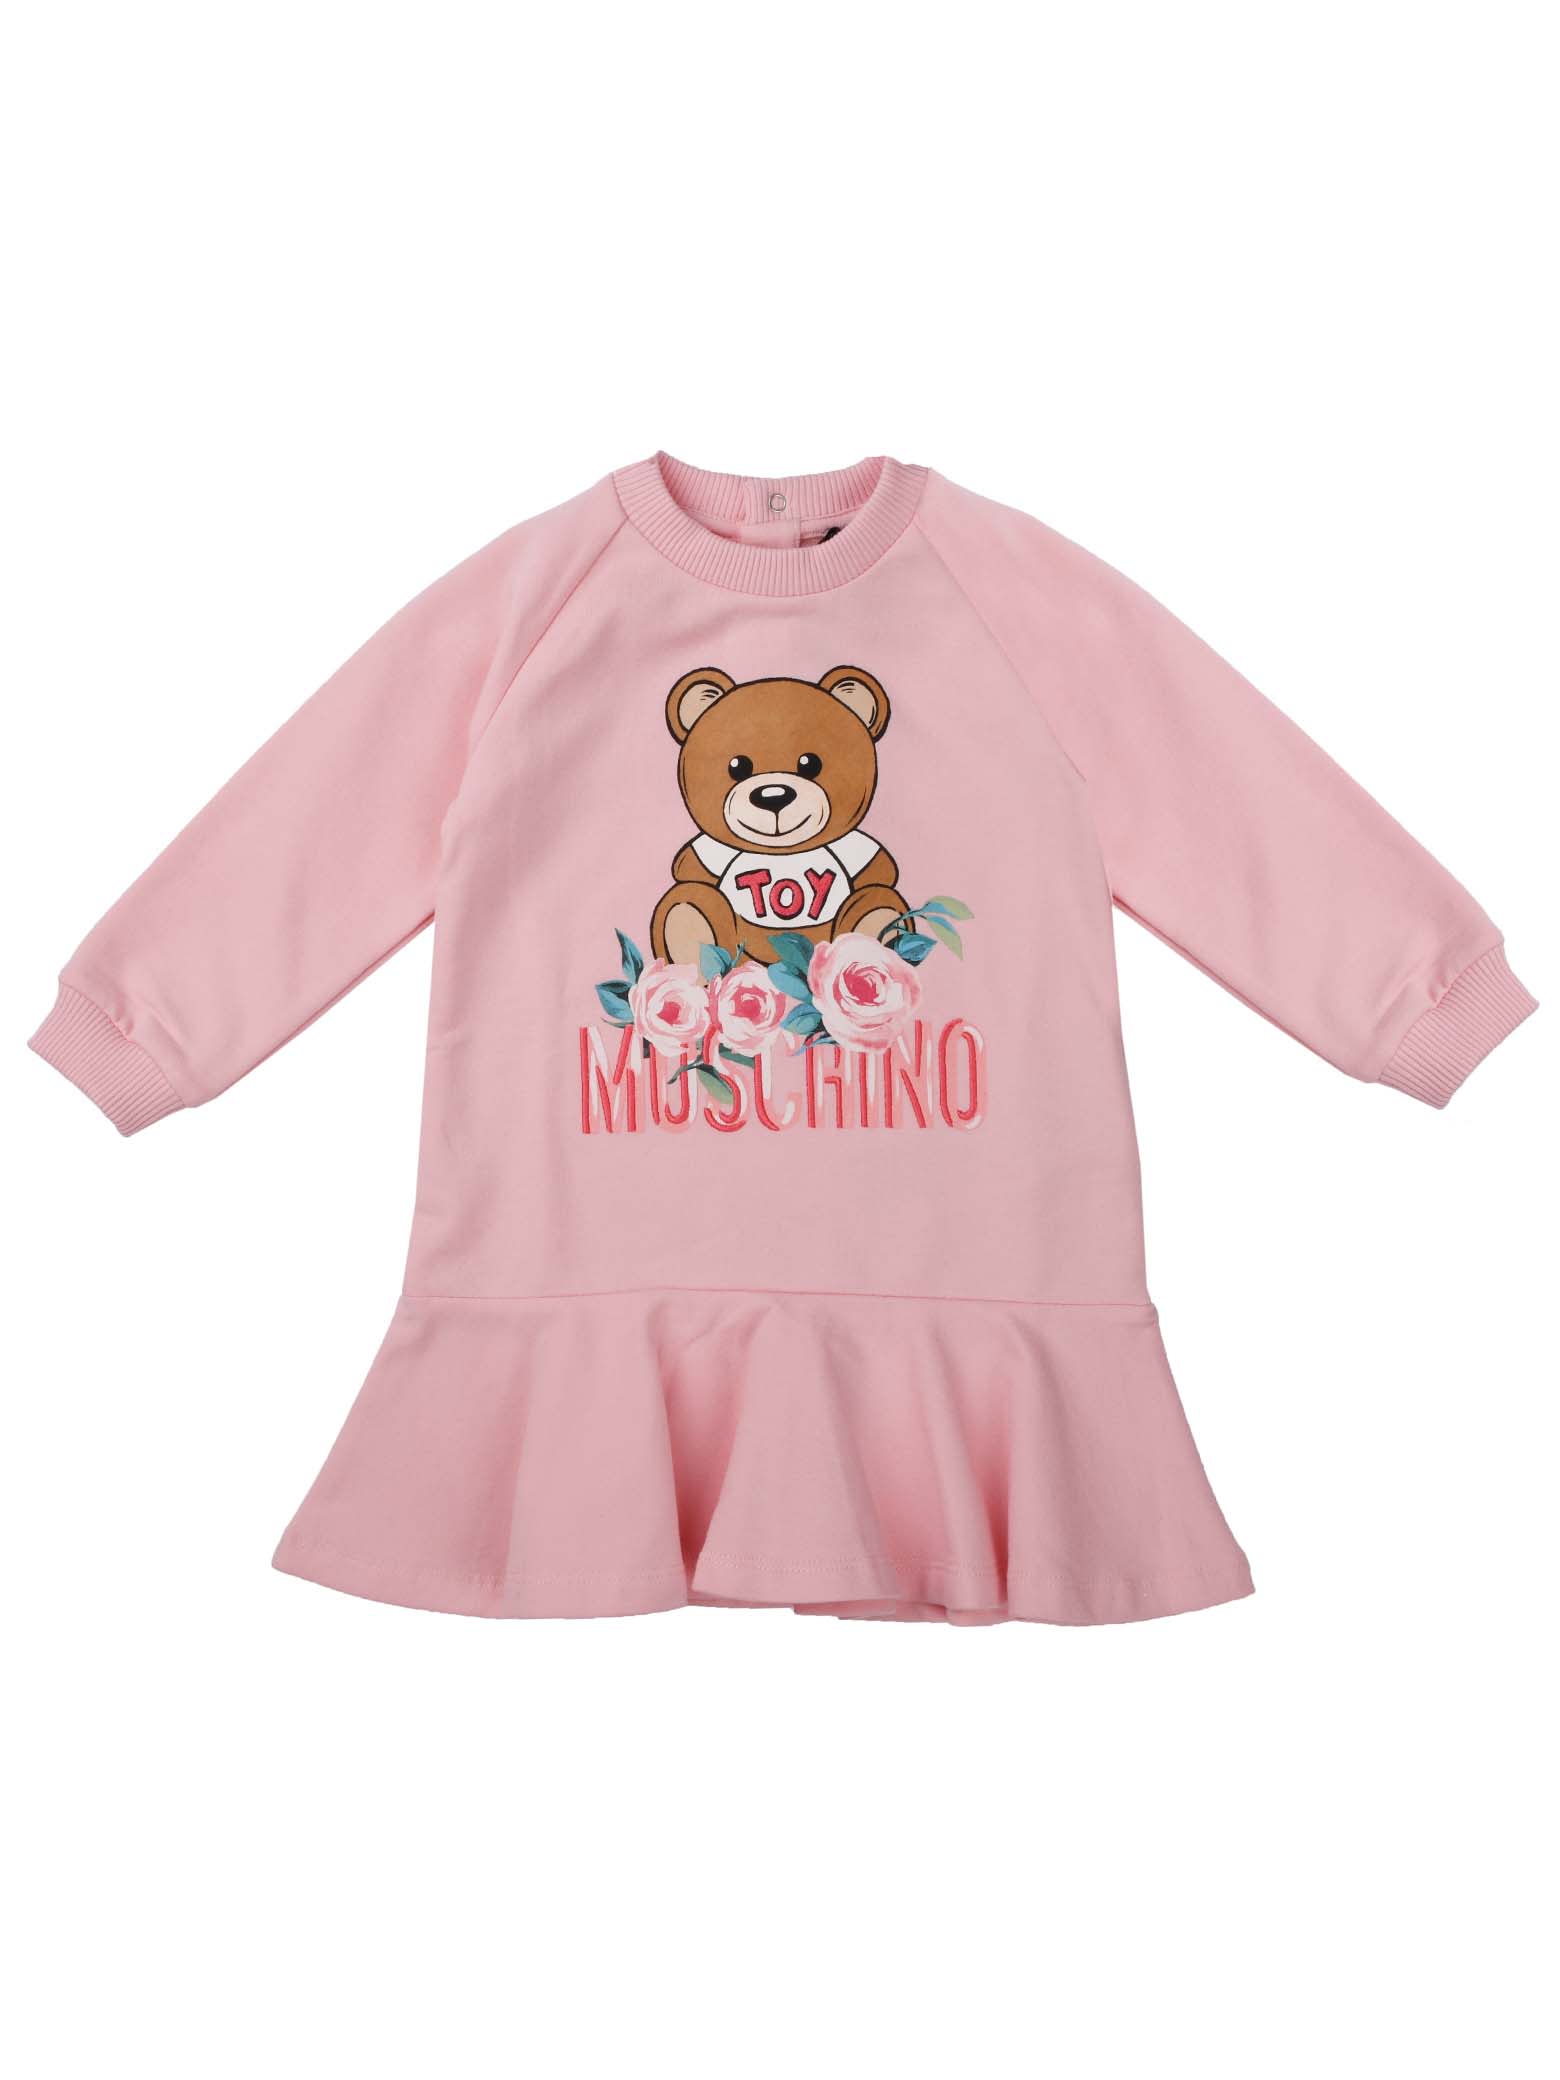 Moschino Pink Dress With Bear